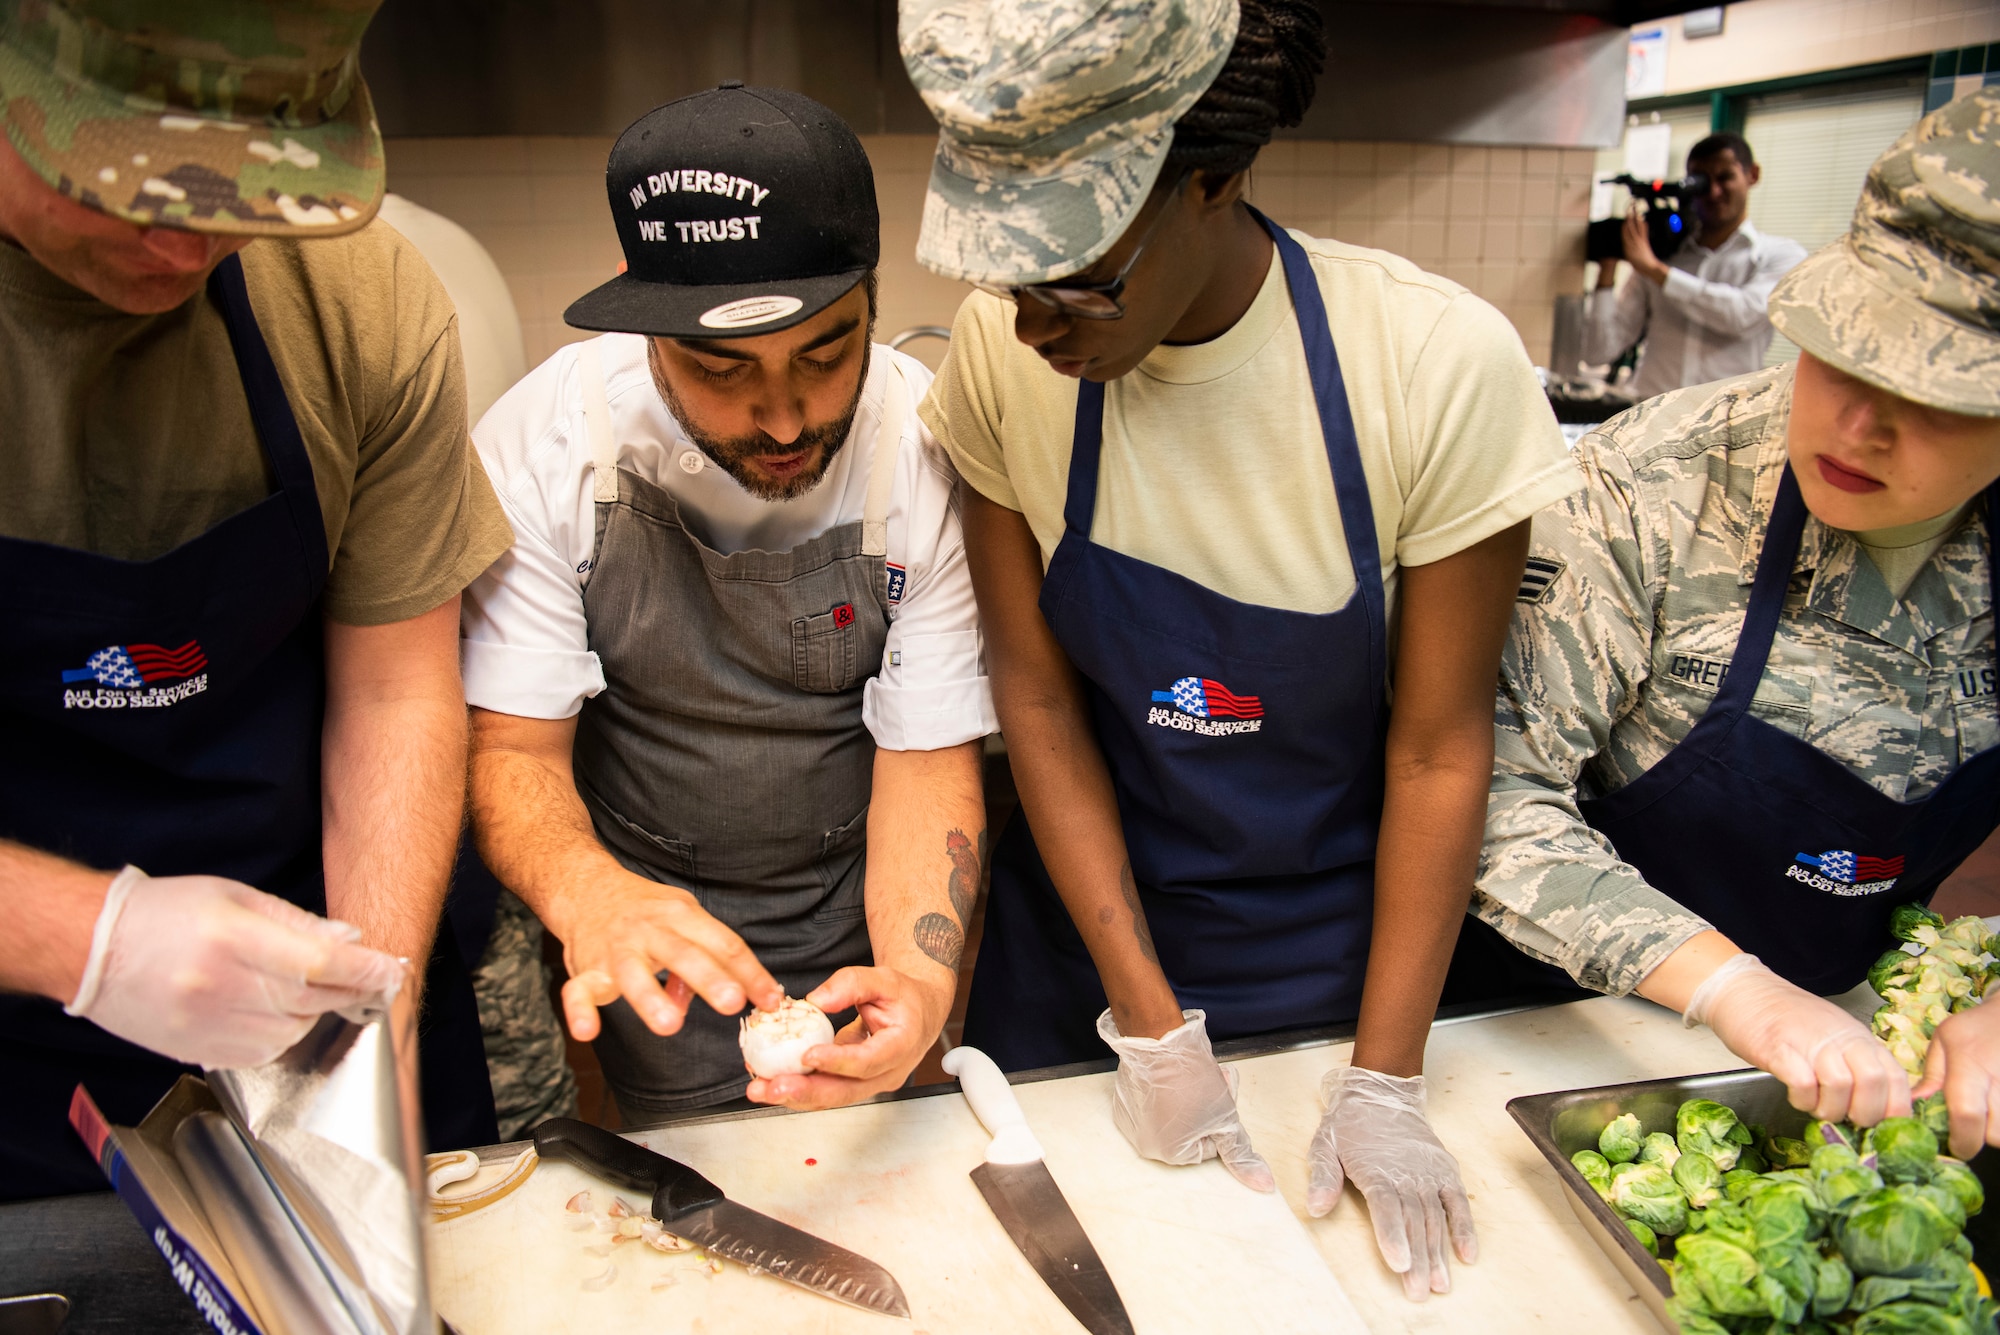 Chef David Viana, USO Celebrity Chef Tour participant, instructs his team The Startled Koalas on the components of their dish for the cooking competition Oct. 15, 2019, at F.E. Warren Air Force Base, Wyo. Along with Viana’s team, Chef Justin Sutherland mentored the team Kitchen Regulators and Chef Kevin Scharpf lead Chop It Like It’s Hot. (U.S. Air Force photo by Senior Airman Abbigayle Williams)